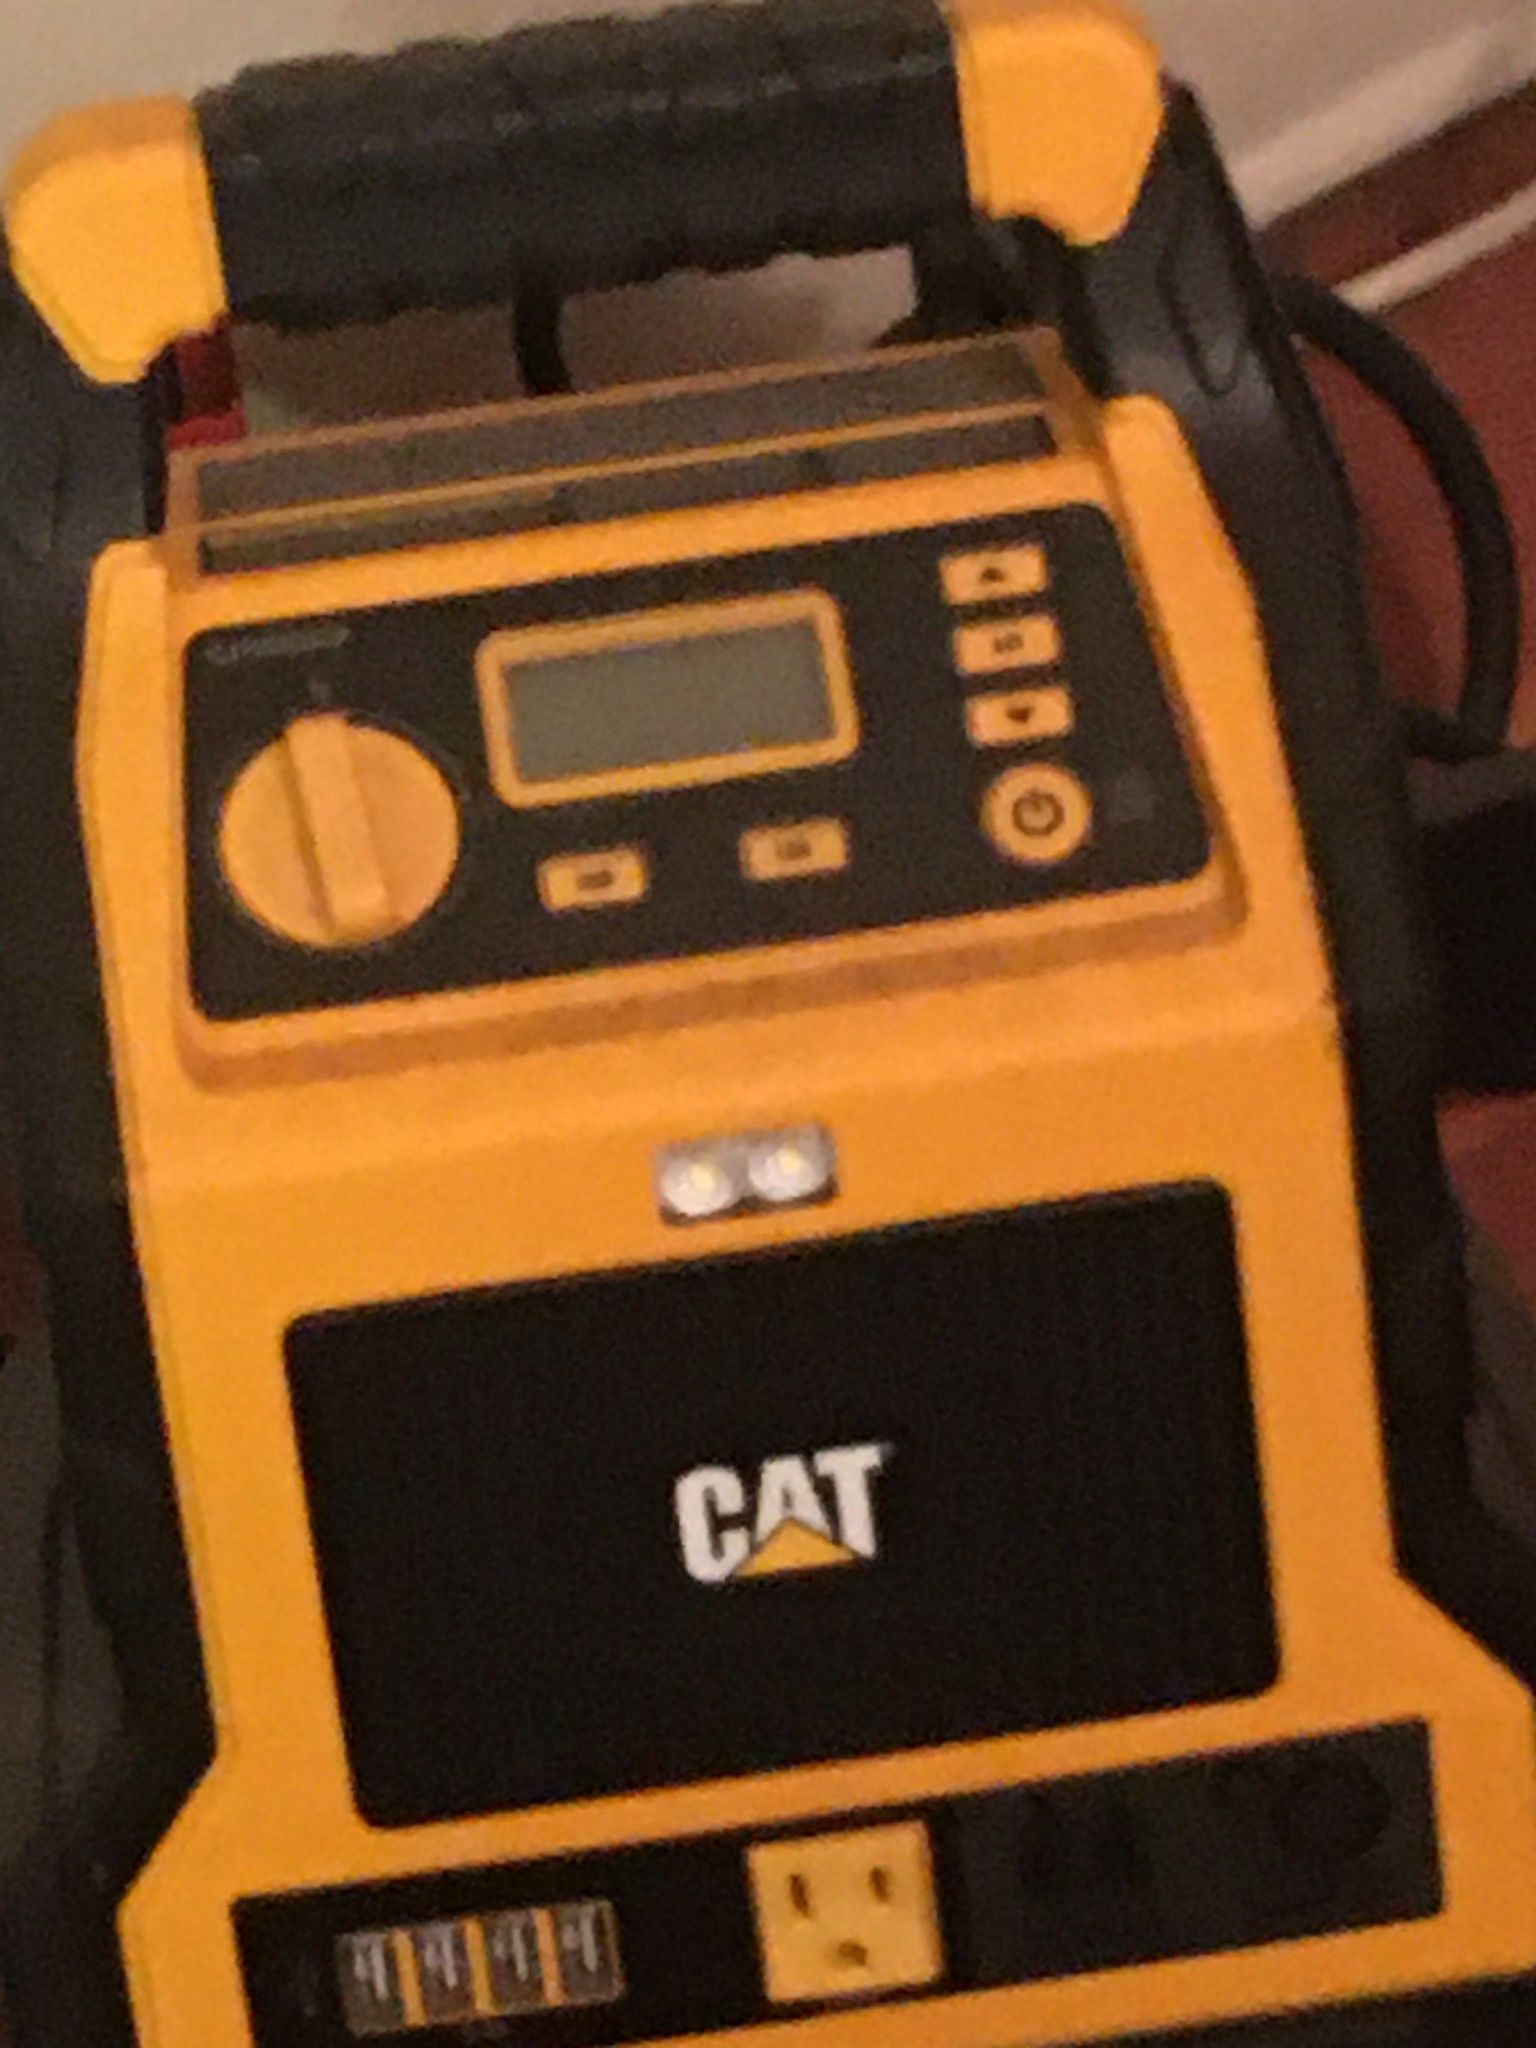 Battery Charger,CAT , Cambridge Area